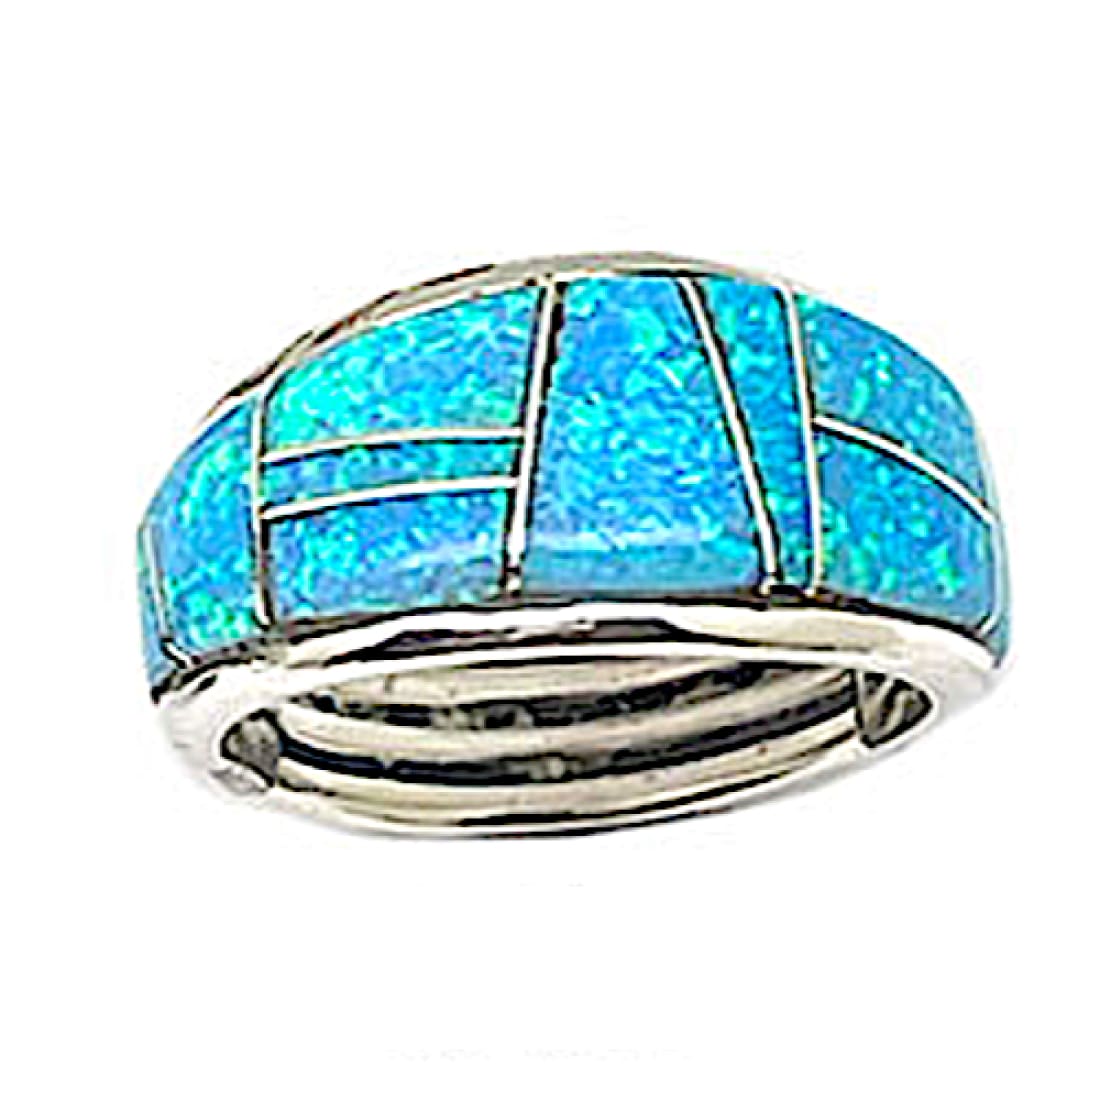 Navajo Opal Inlay Ring Sz 9 Sterling Silver Edison Yazzie